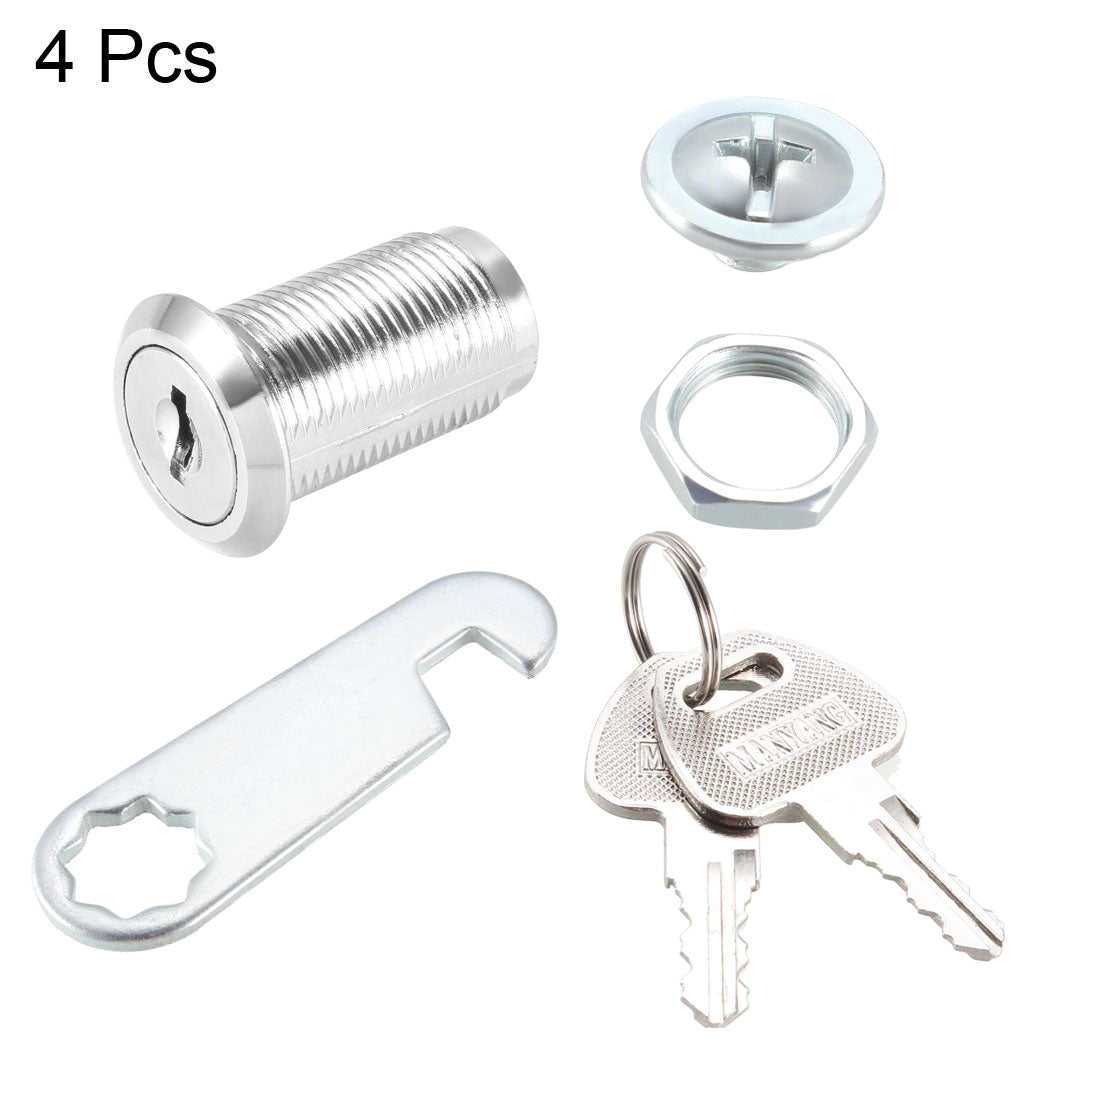 uxcell Uxcell Cam Locks 30mm Cylinder Length Fit Up to 7/8-inch Thick Panel Keyed Alike 4Pcs